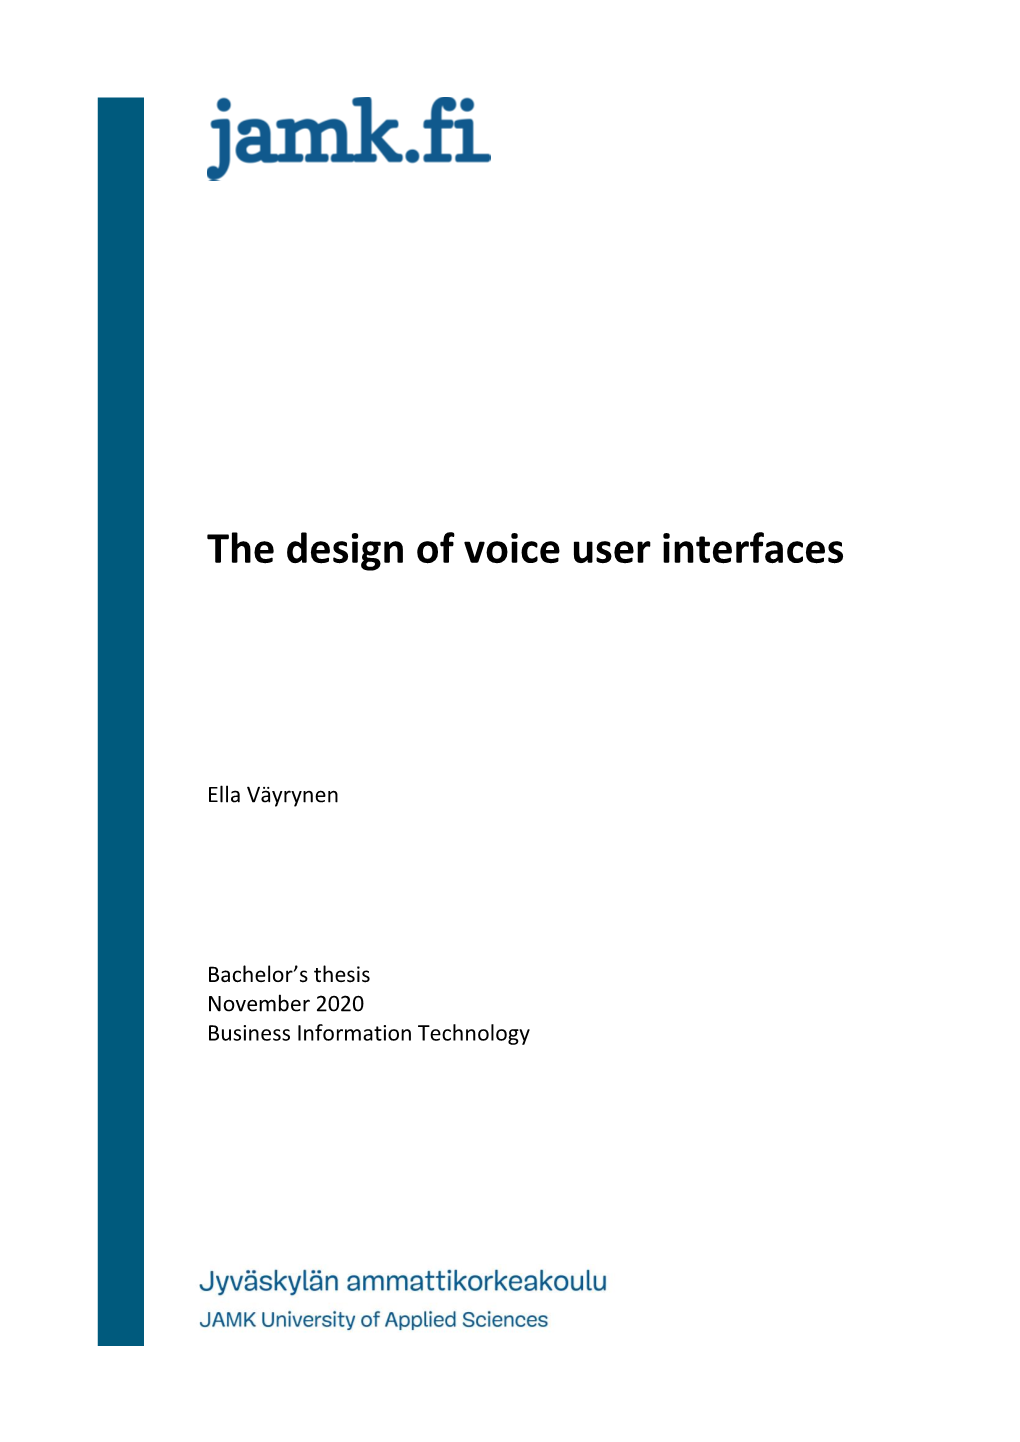 The Design of Voice User Interfaces